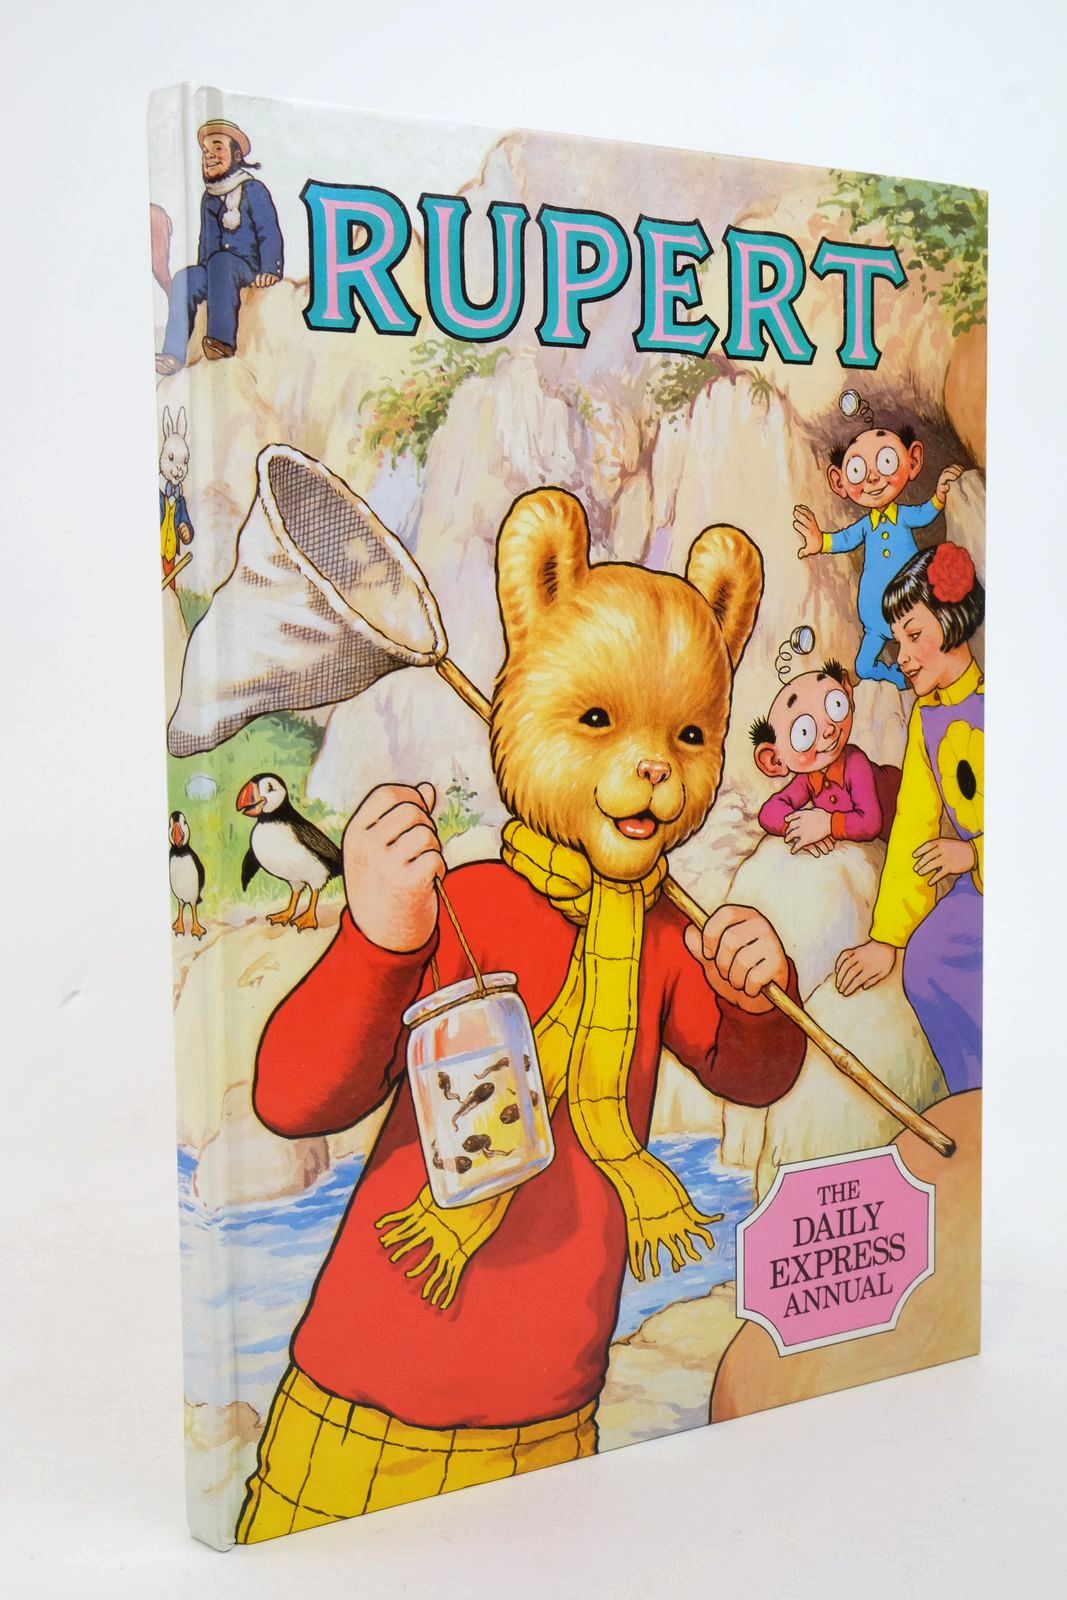 Photo of RUPERT ANNUAL 1986 illustrated by Harrold, John published by Express Newspapers Ltd. (STOCK CODE: 1322840)  for sale by Stella & Rose's Books